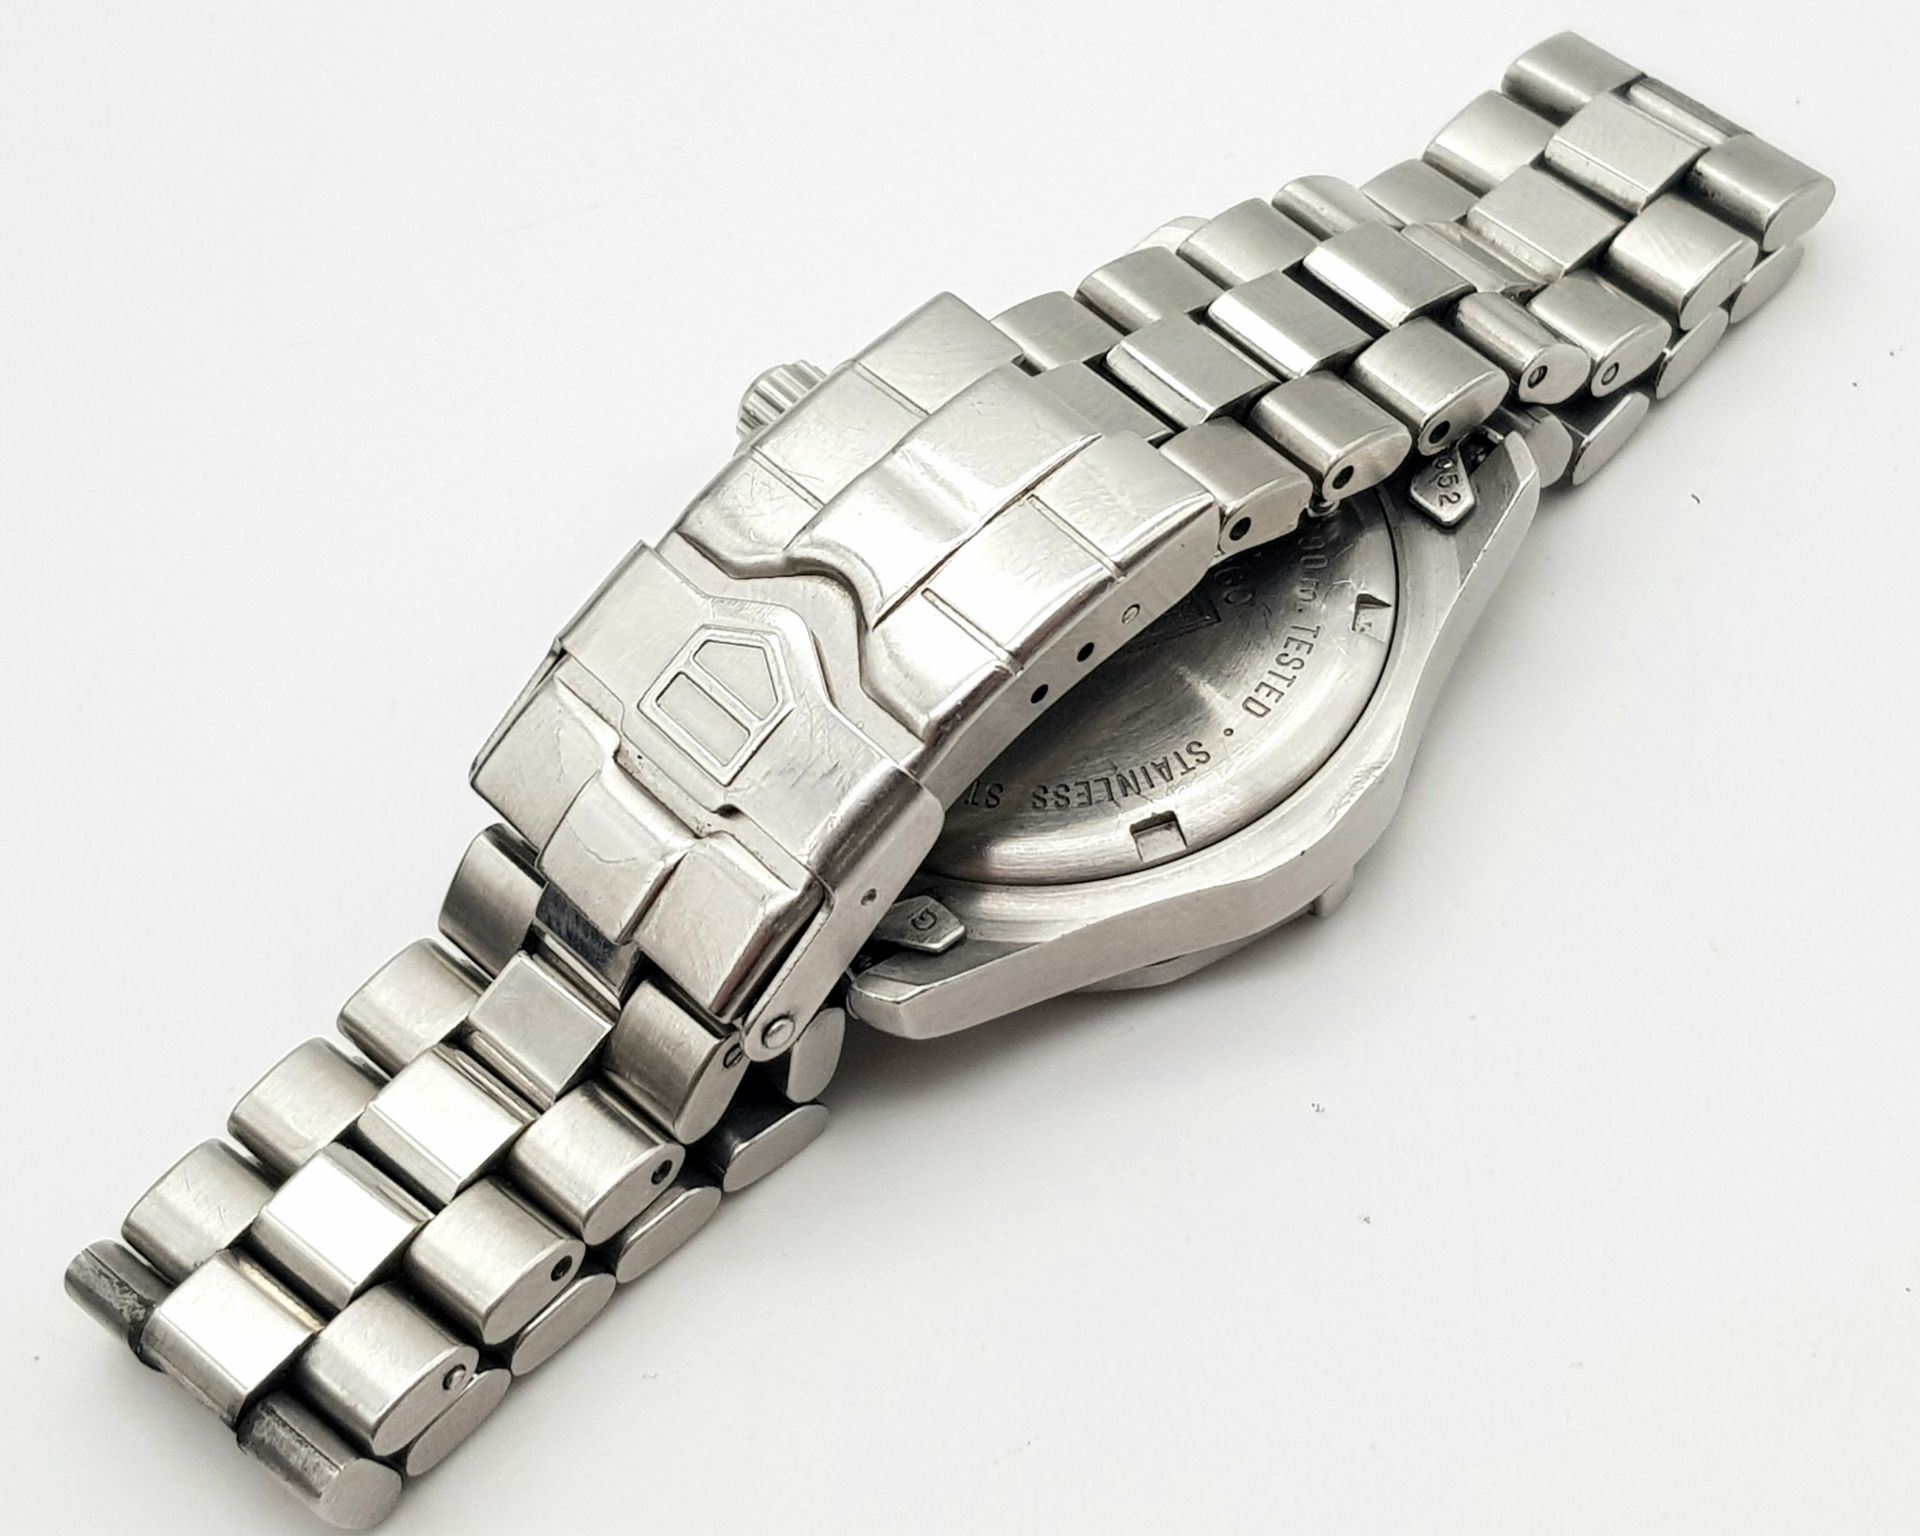 A TAG-HEUER LADIES PROFESSIONAL STAINLESS STEEL WATCH WITH AMAZING NAVY BLUE DIAL . 32mm COMES IN - Image 5 of 7